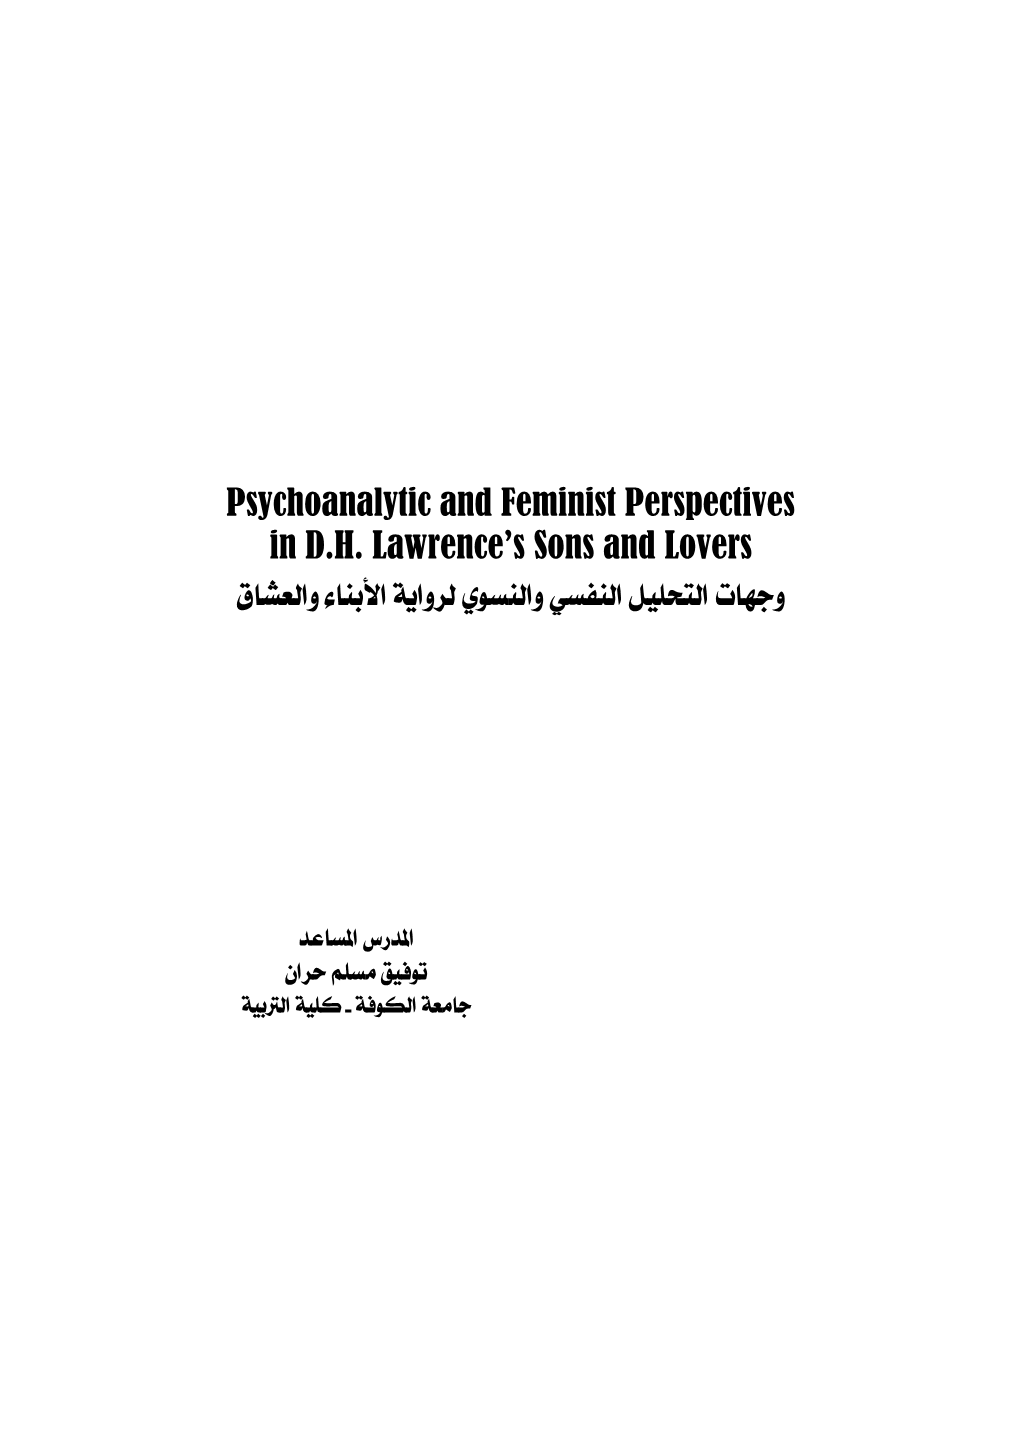 Psychoanalytic and Feminist Perspectives in D.H. Lawrence's Sons and Lovers Psychoanalytic and Feminist Perspectives in D.H